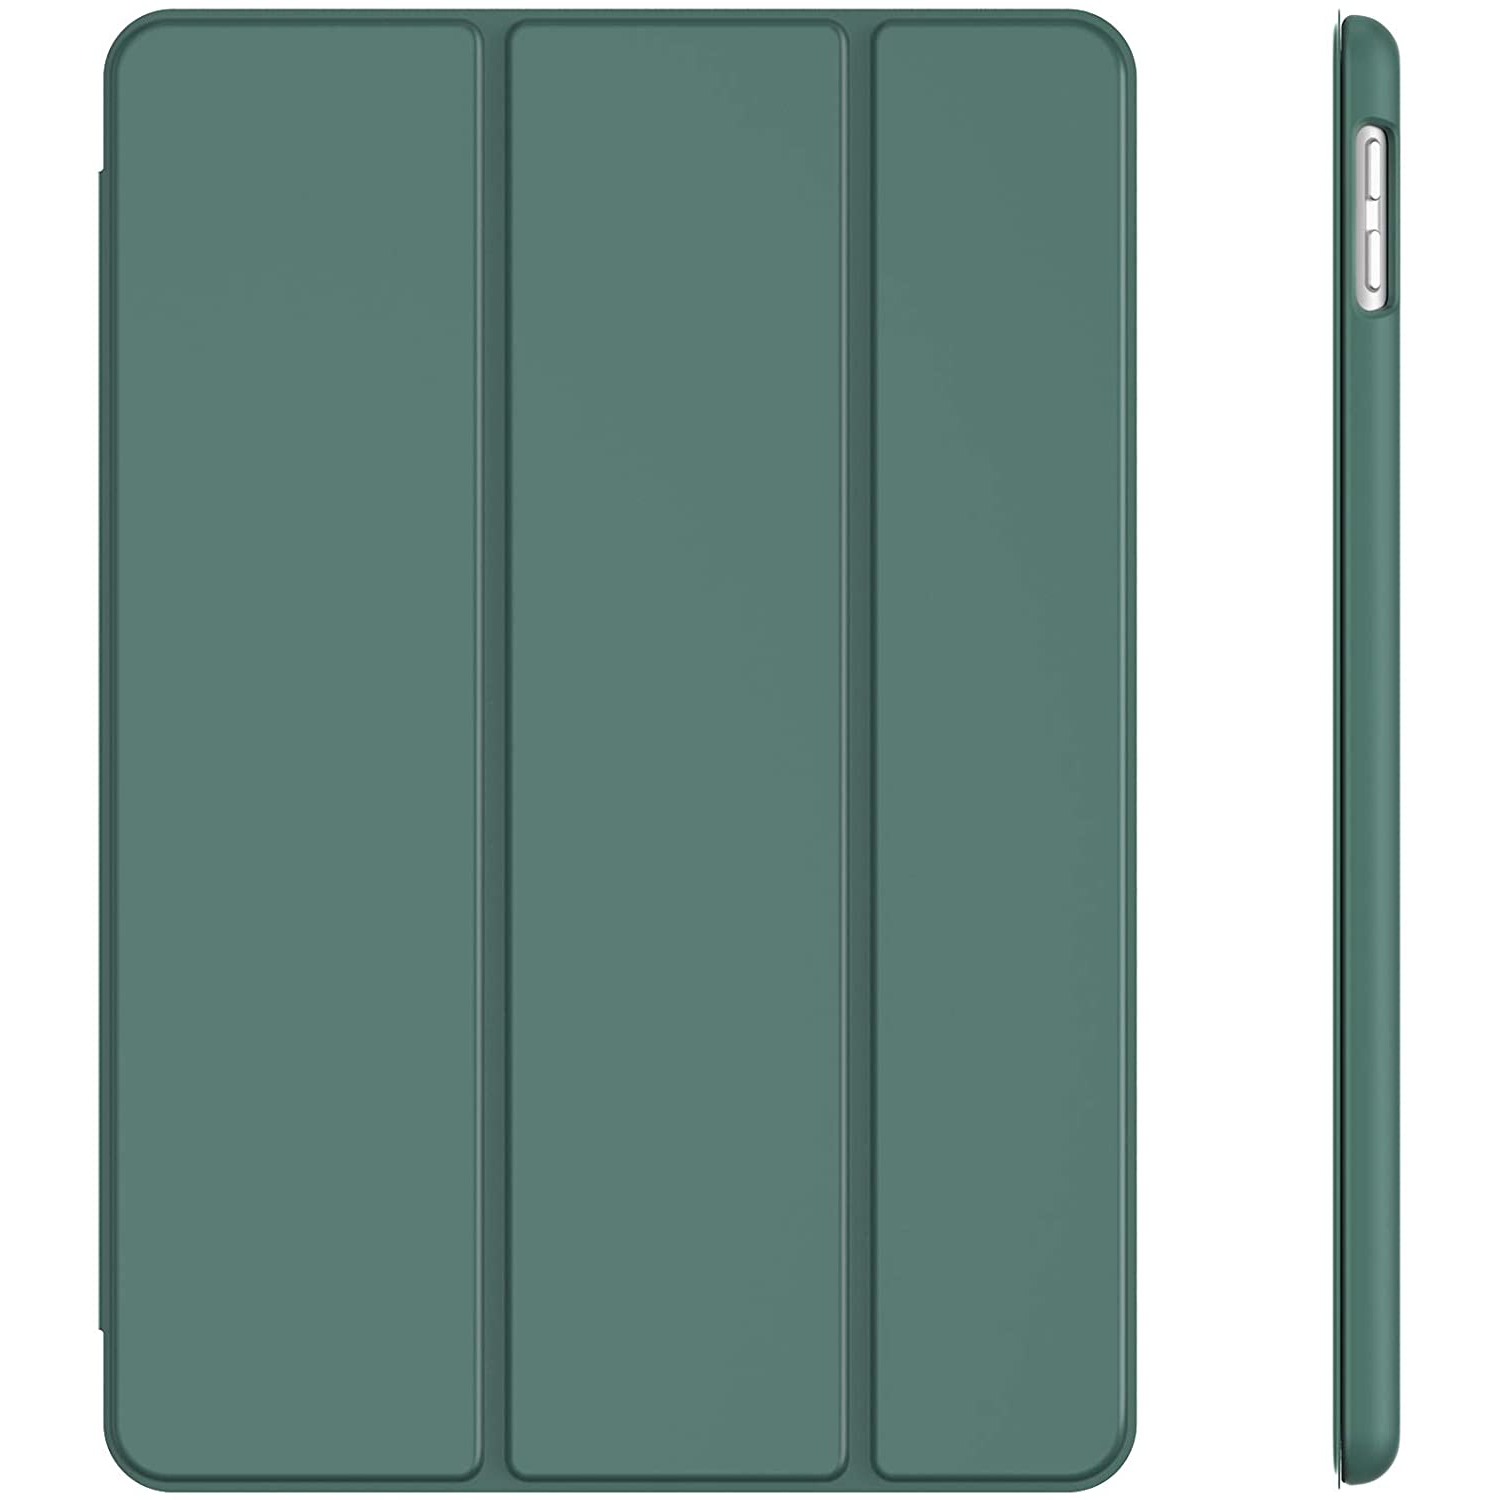 Choetech Leather Case For iPAd 10.2 Inch - (PC0132) - Green - Brand New